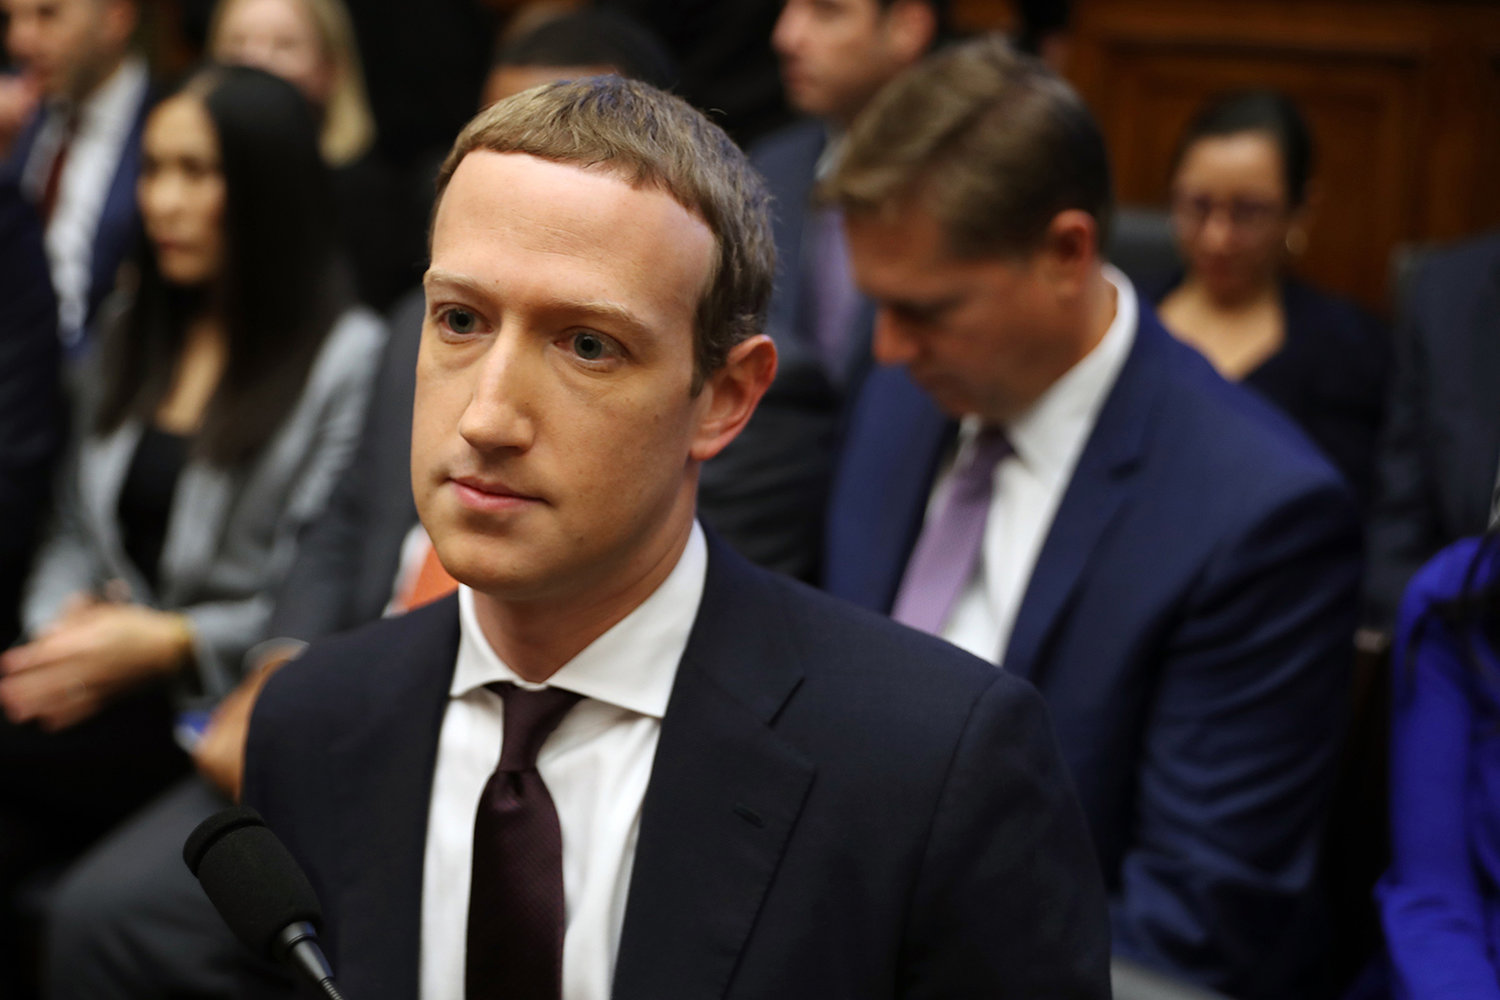 Facebook co-founder and CEO Mark Zuckerberg arrives to testify before the House Financial Services Committee in the Rayburn House Office Building on Capitol Hill Oct. 23, 2019 in Washington, D.C. (Chip Somodevilla/Getty Images/TNS)